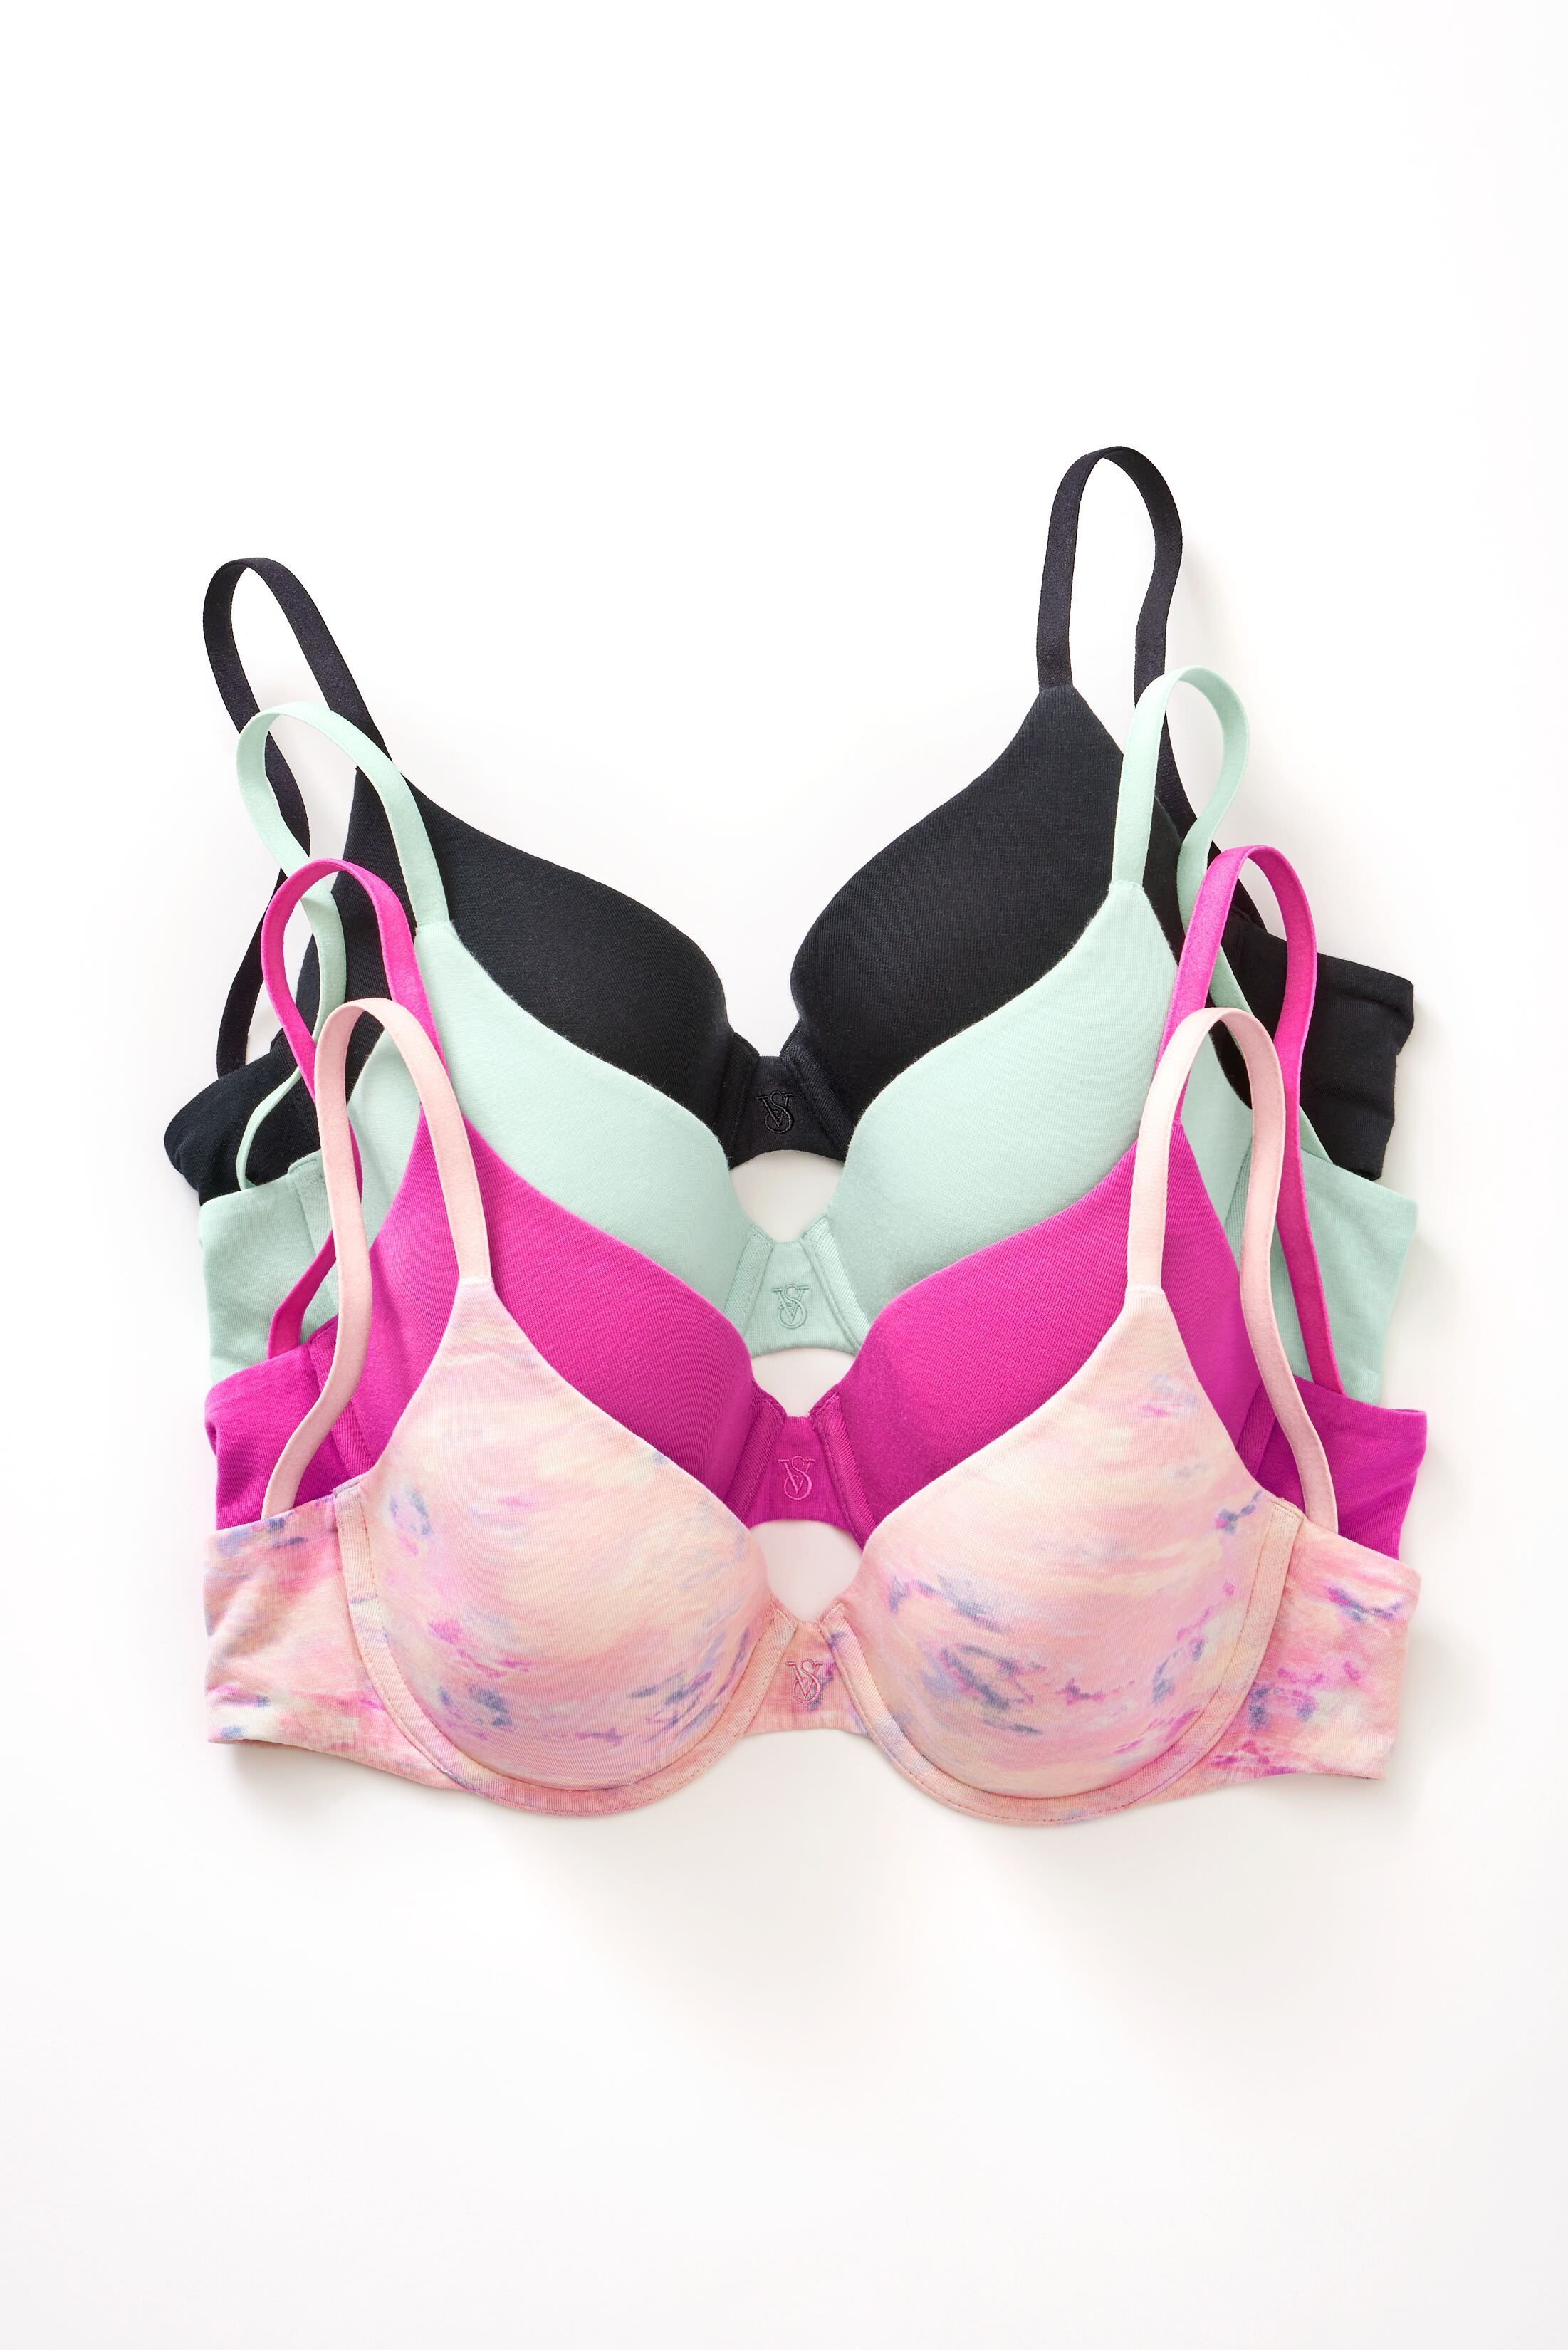 Victoria's Secret Launches Recycled Bra to Reduce Waste (VSCO) - Bloomberg